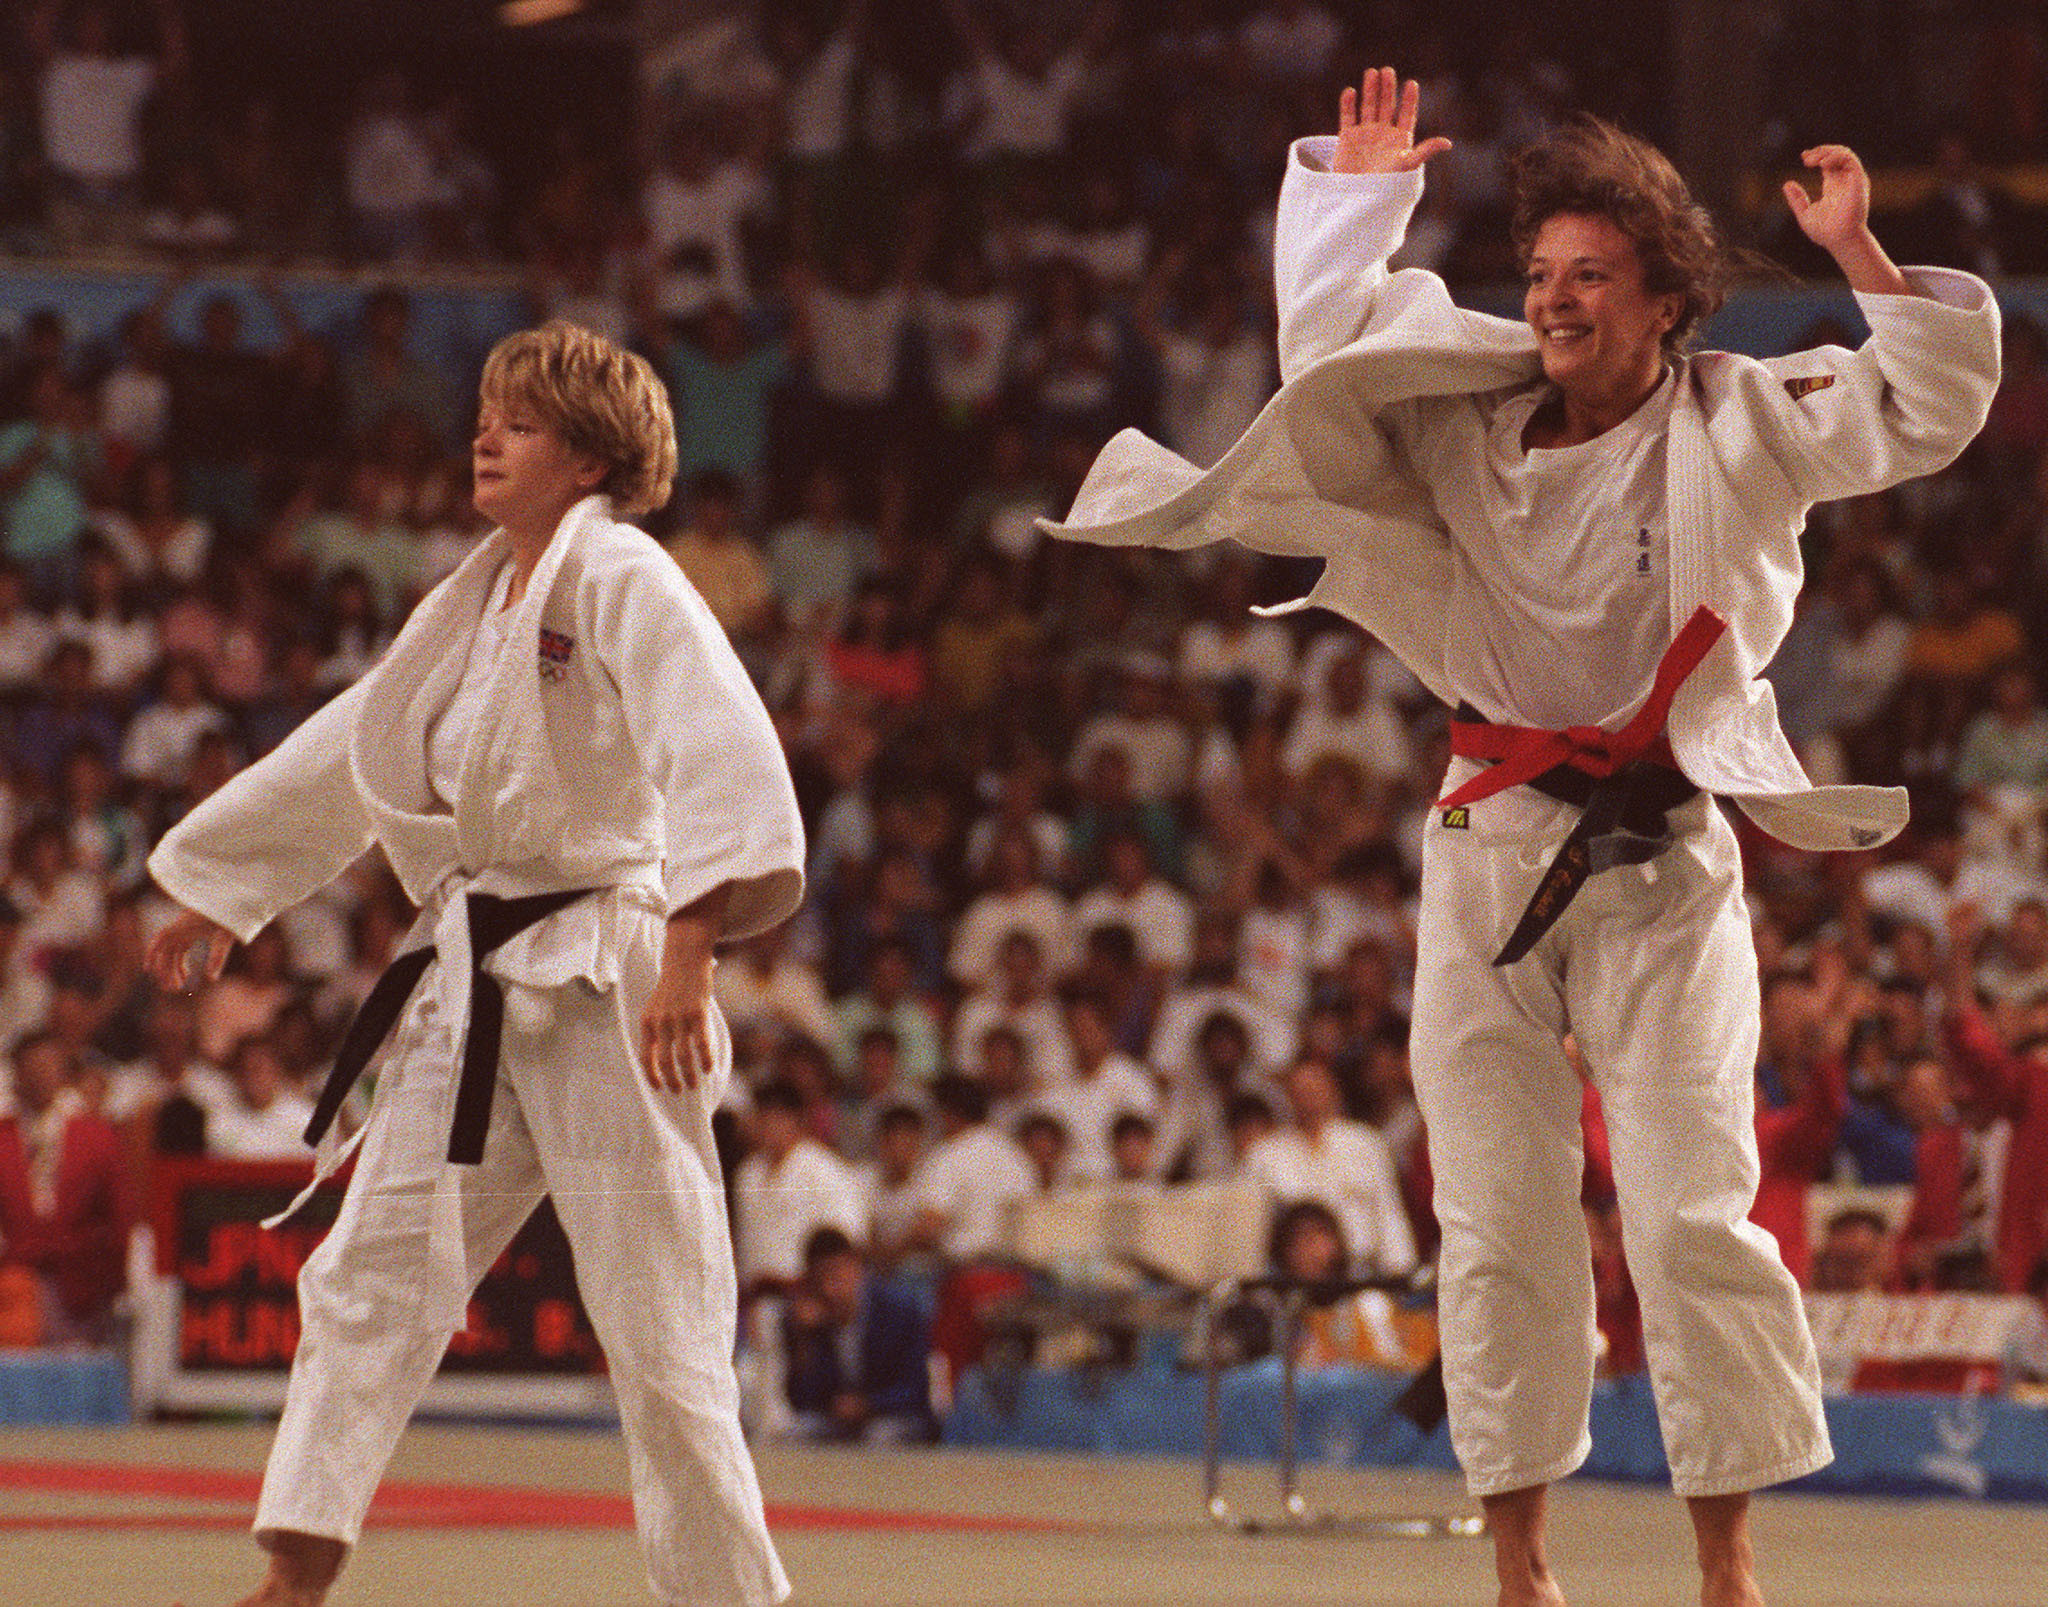 Miriam Blasco of Spain (R) jubilates after defeated Fairbrother of Great Britain in the women's under-56 kg judo final, 31 July 1992 at the Olympic Games in Barcelona ©Getty Images